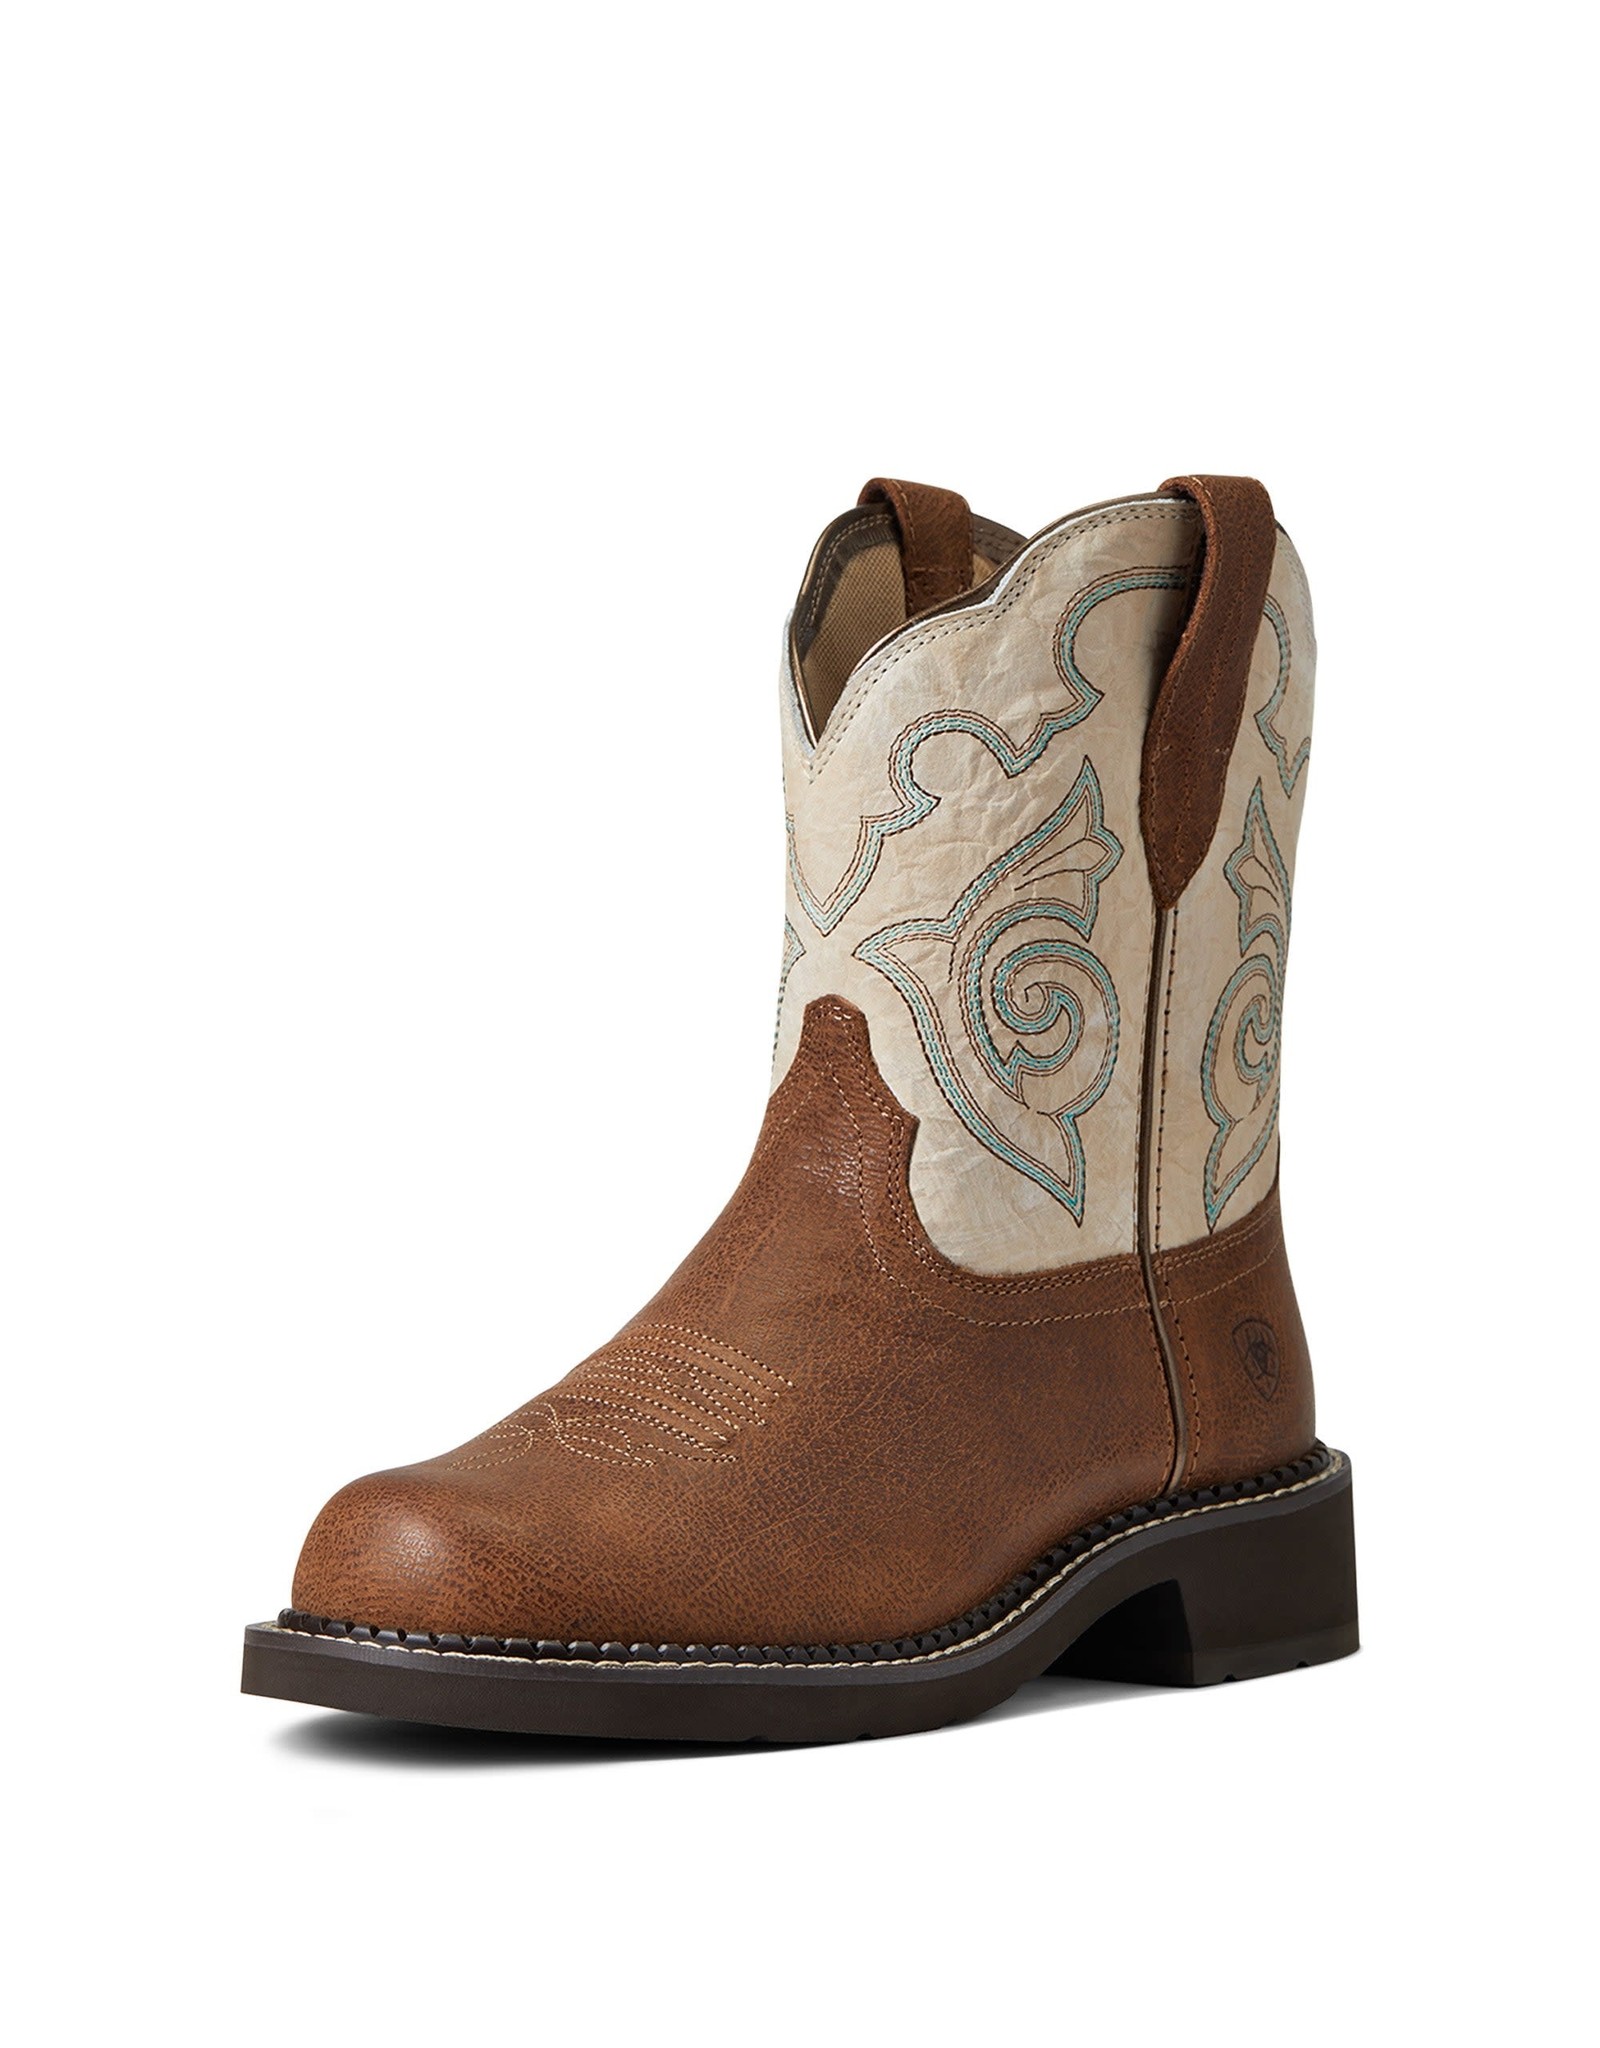 Ariat Ladies Heritage Tess 10040265 Fatbaby Western Boots